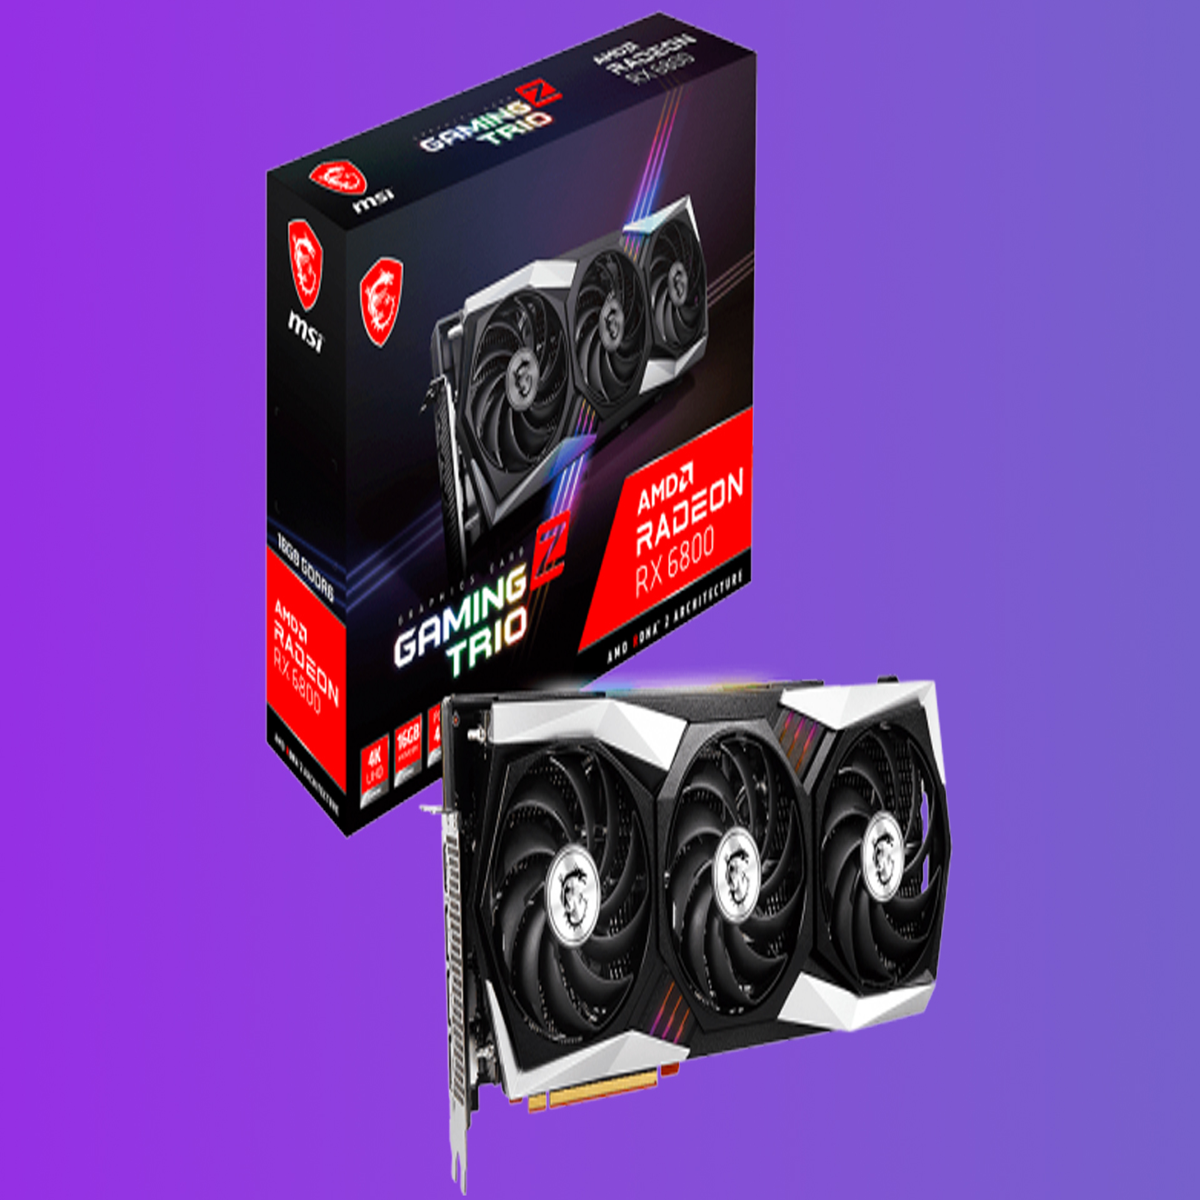 Recent price drops make the RX 6800 better value than AMD's latest  offerings